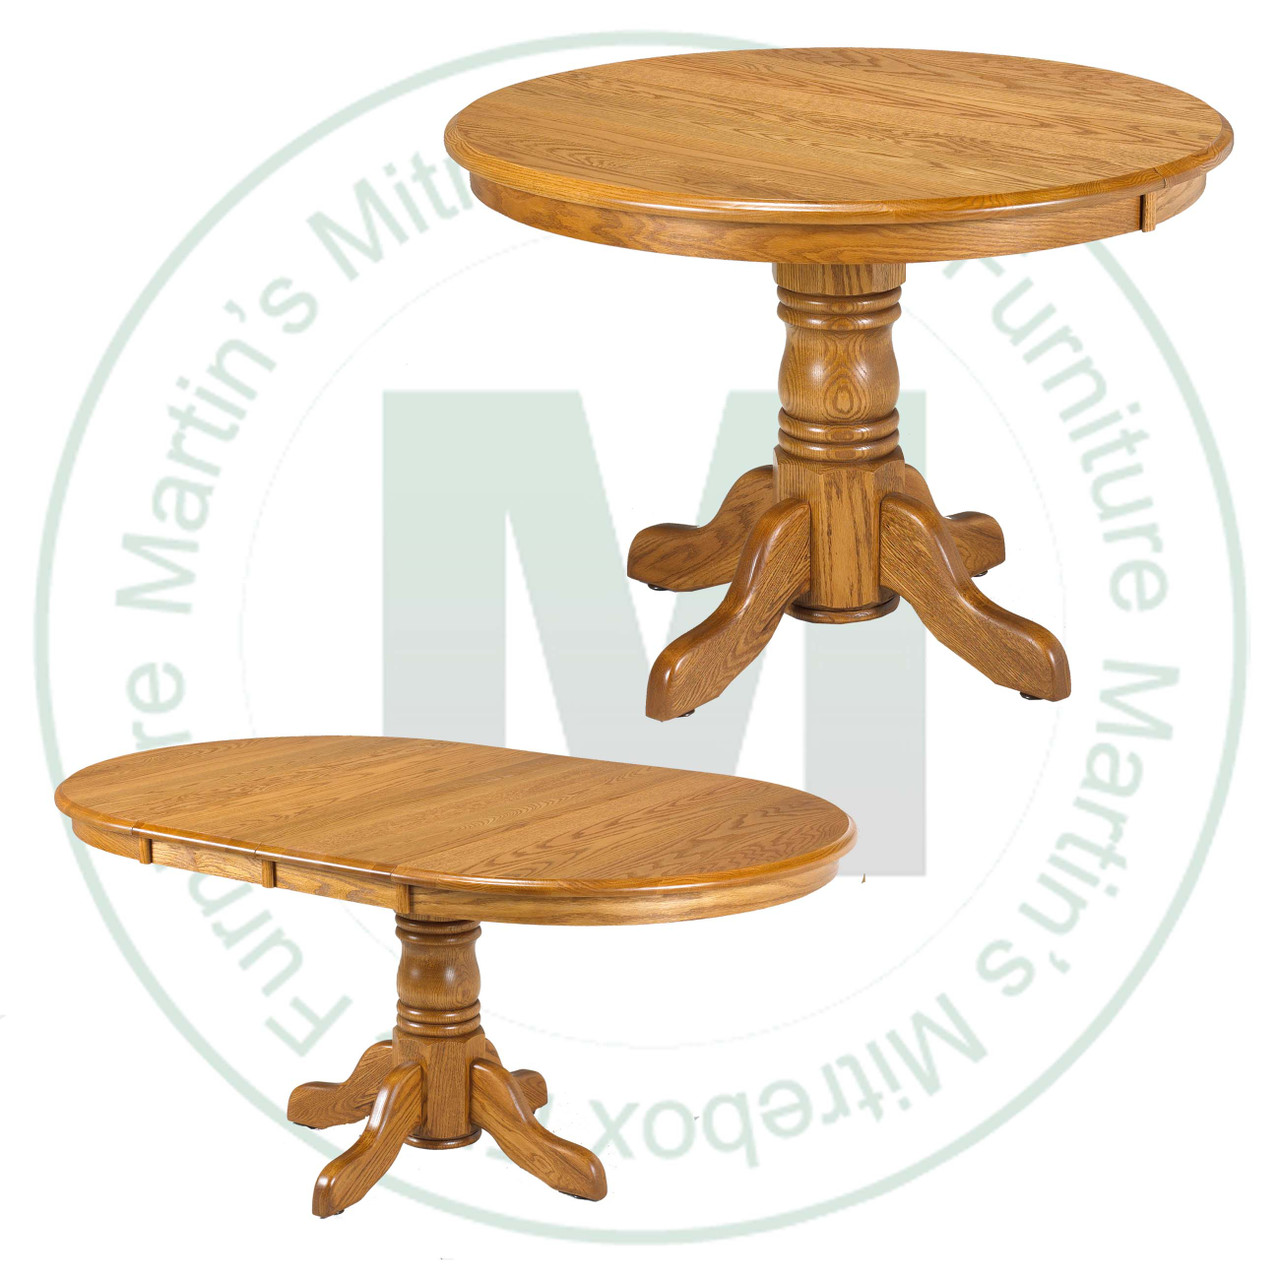 Maple Lancaster Collection Single Pedestal Table 48''D x 48''W x 30''H With 2 - 12'' Leaves. Table Has 1.25'' Thick Top